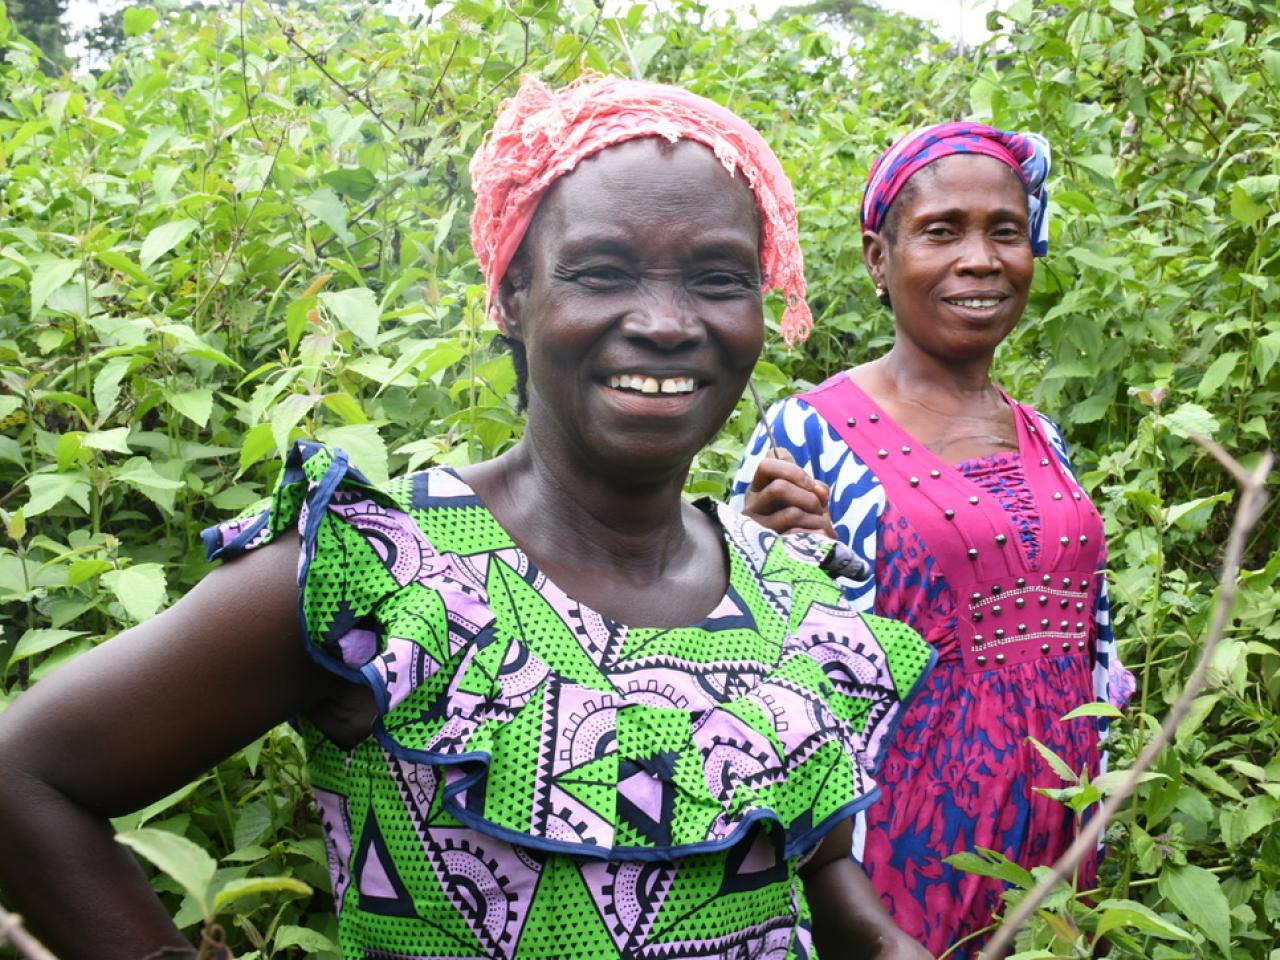 Two women smiling among their crops